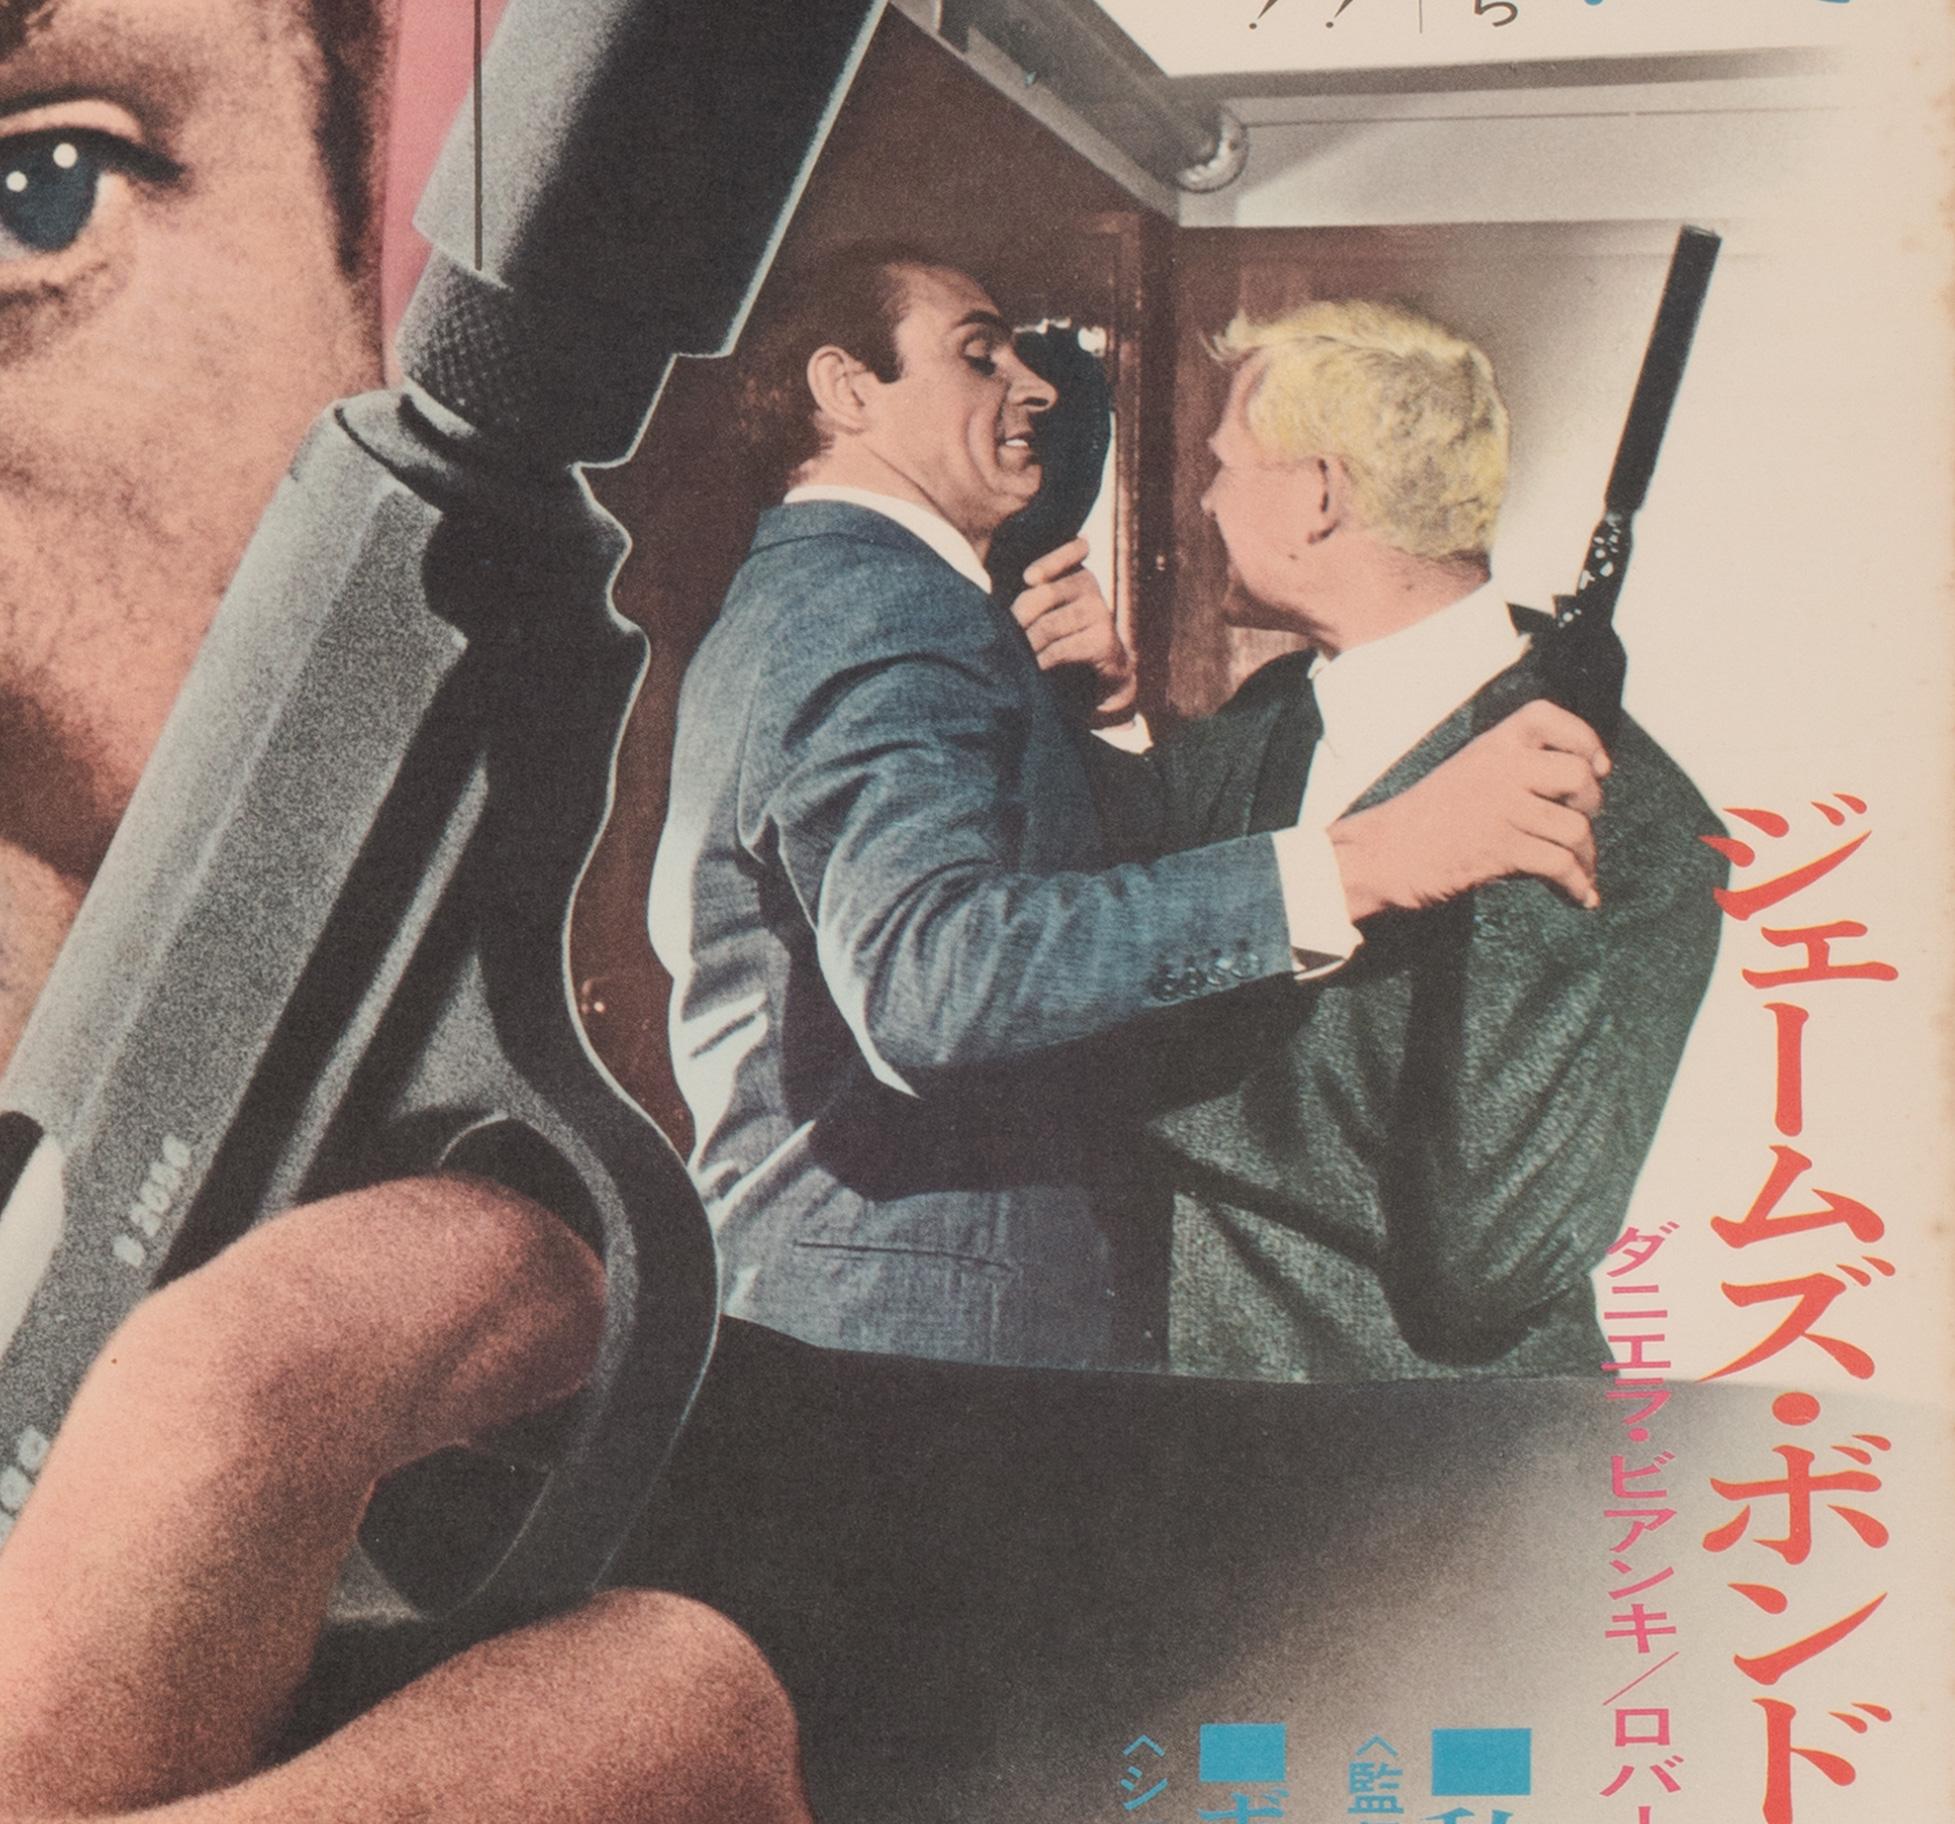 From Russia With Love R1972 Japanese B2 Film Poster For Sale 1